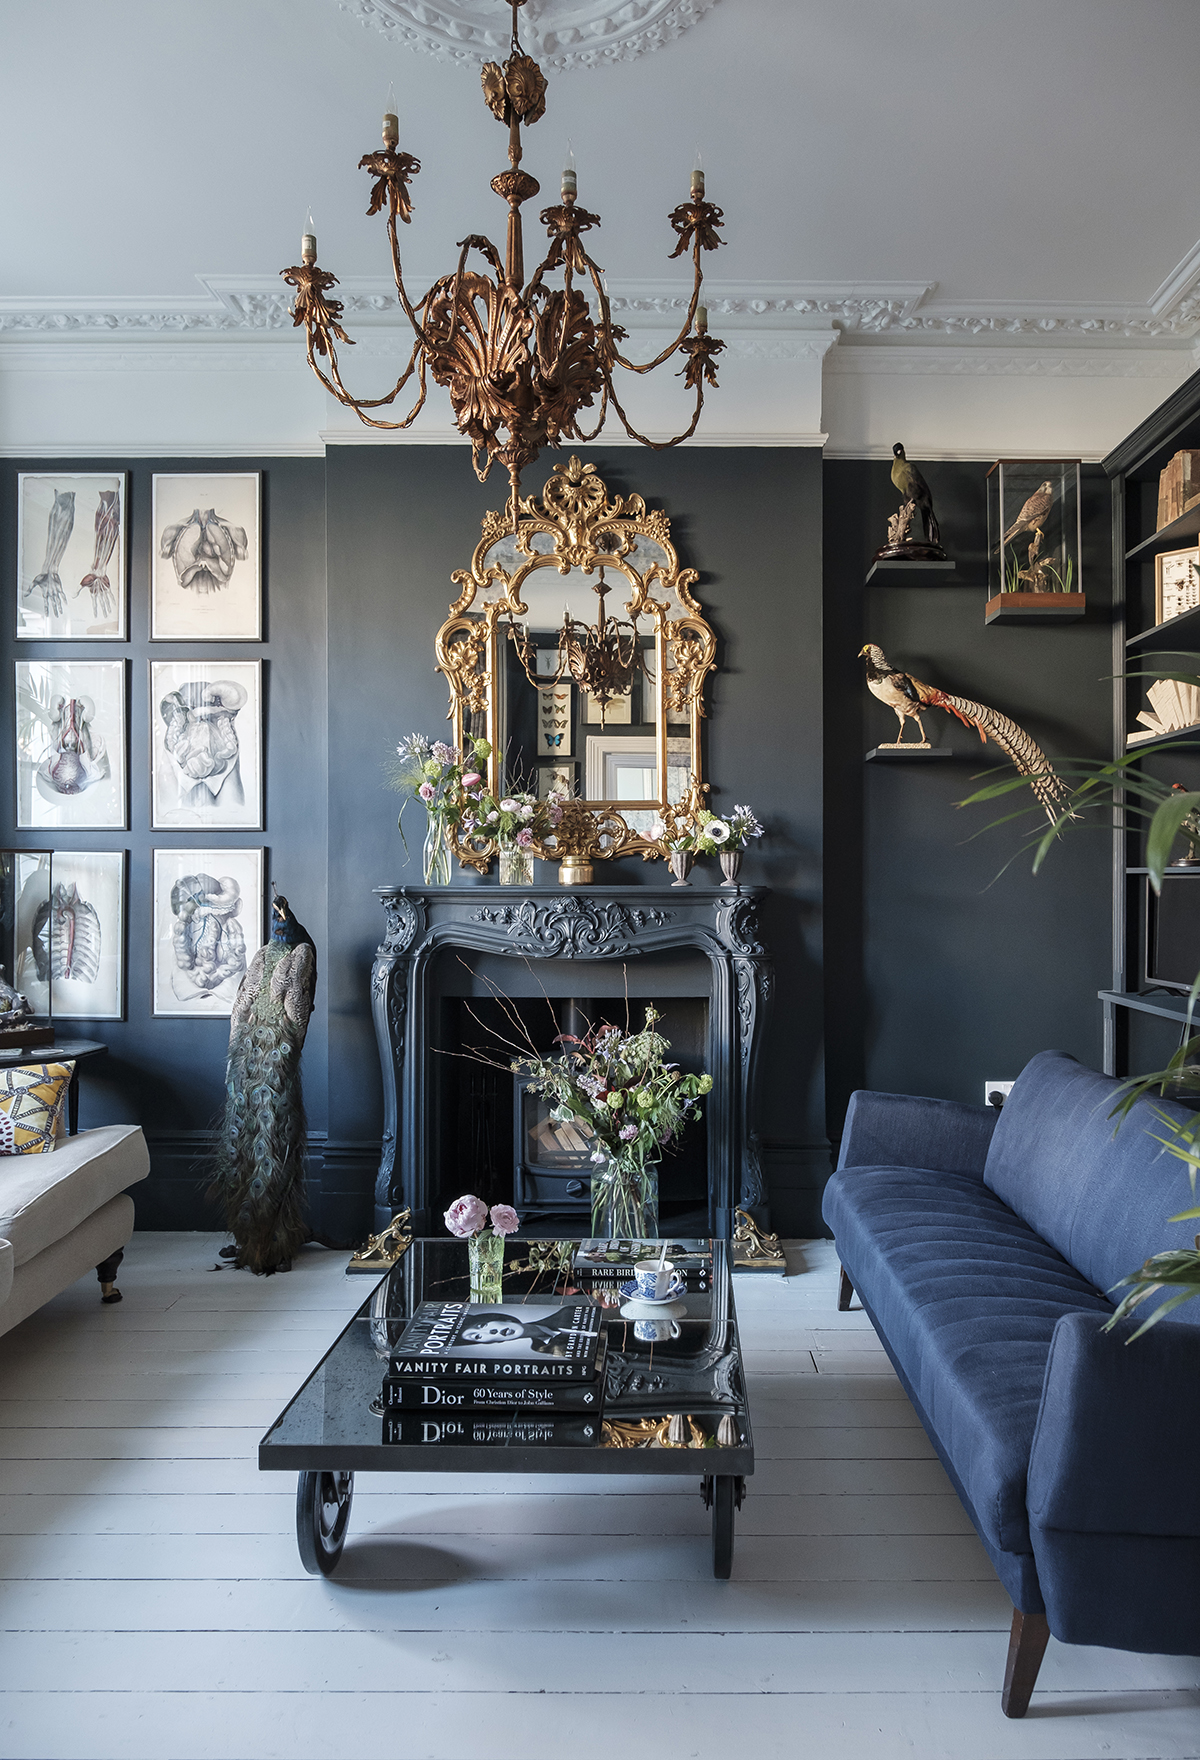 Why are Victorian interiors so unappealing? | House & Garden